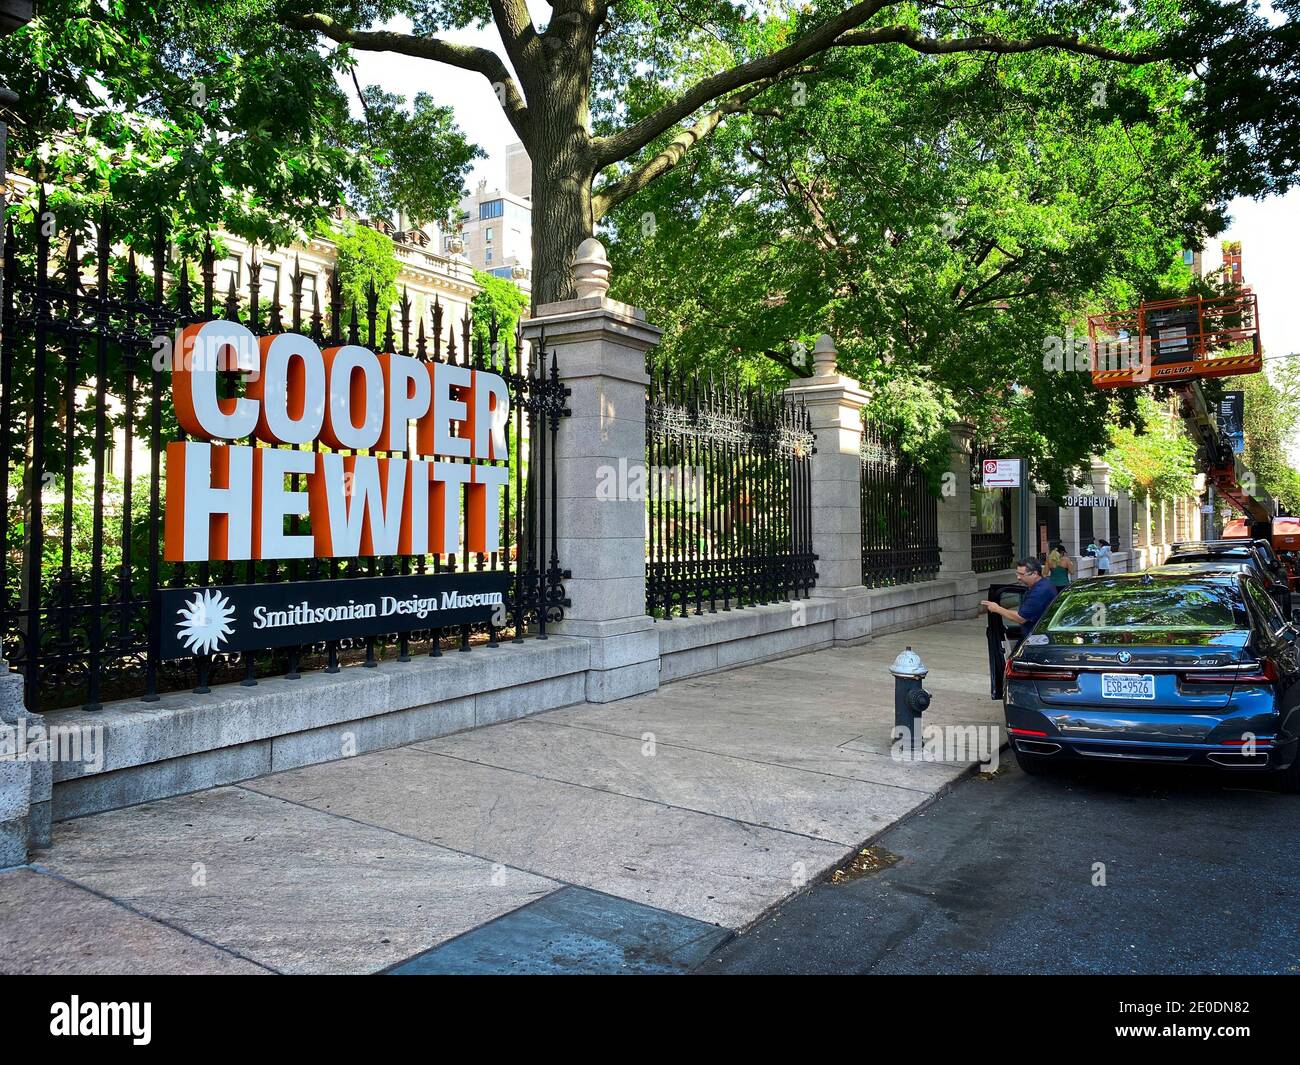 New York, NY, USA - Dec 31, 2020: A large sign fastened to a fence surrounding the Cooper Hewitt Museum Stock Photo